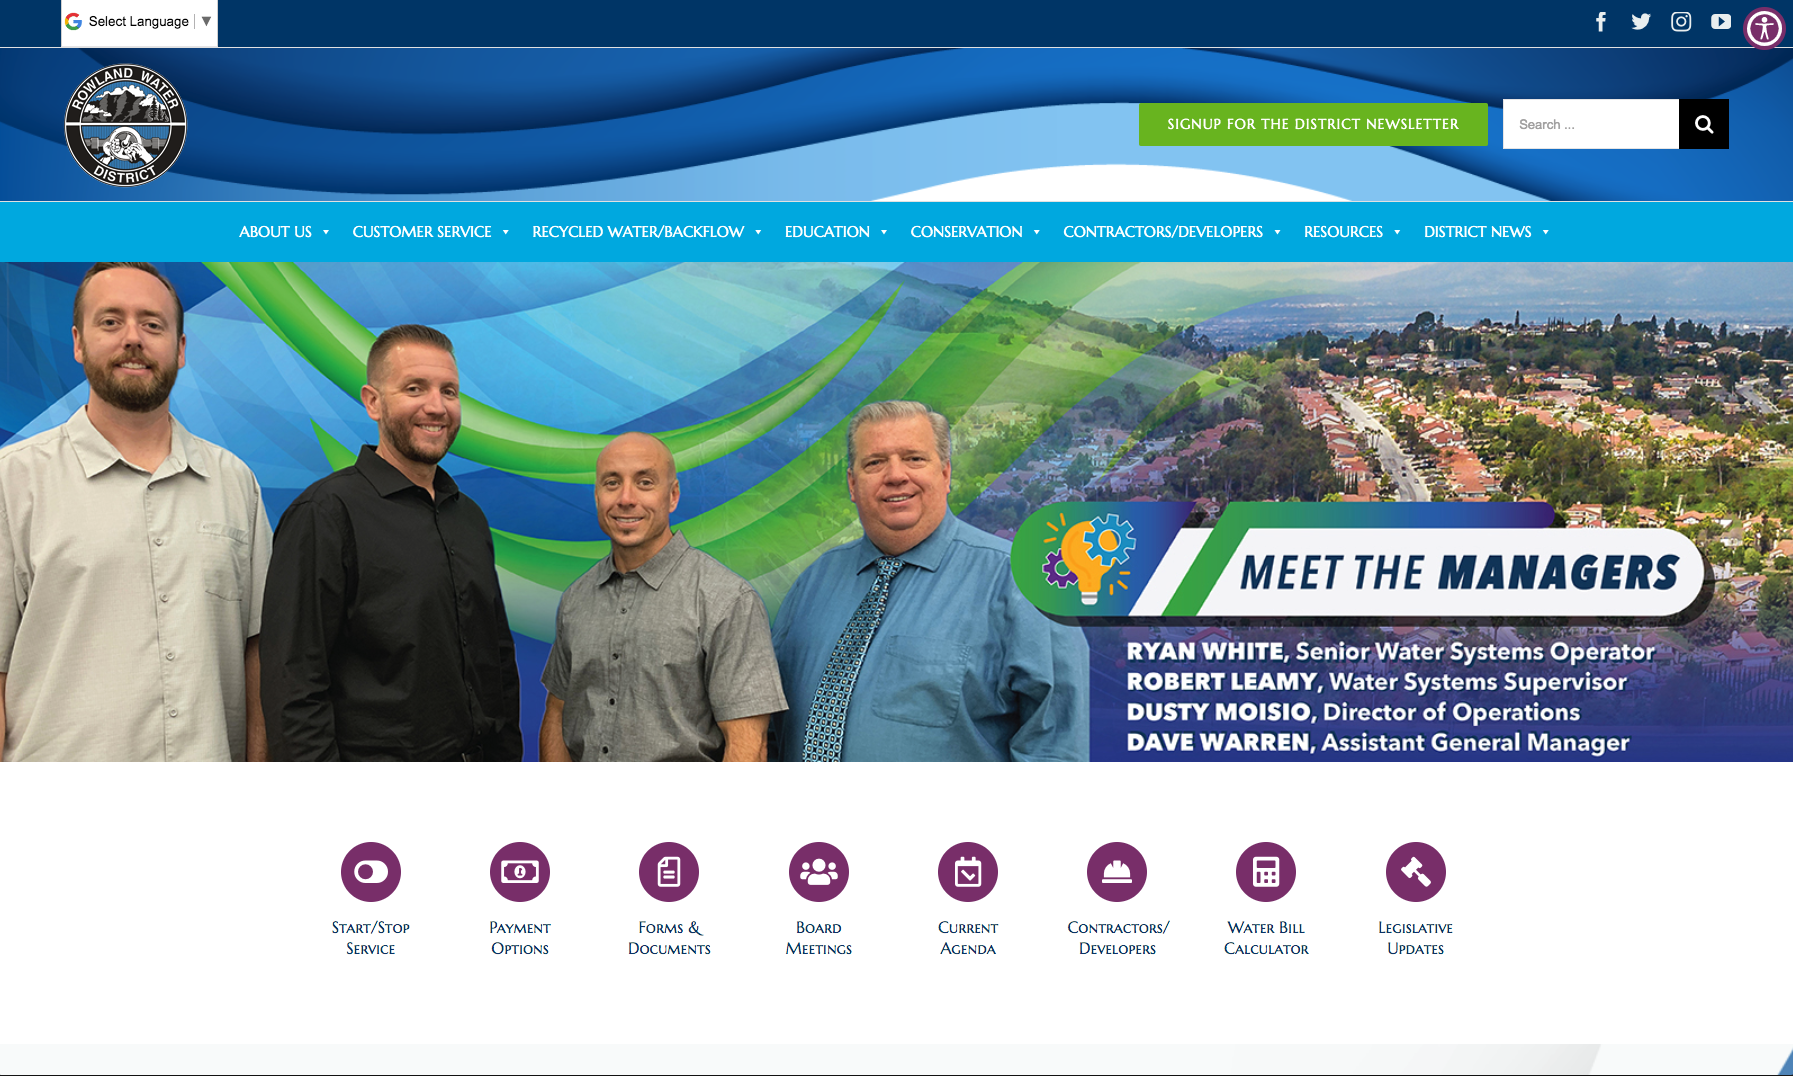 rowland-water-district-enlists-ts-for-website-design-tripepi-smith